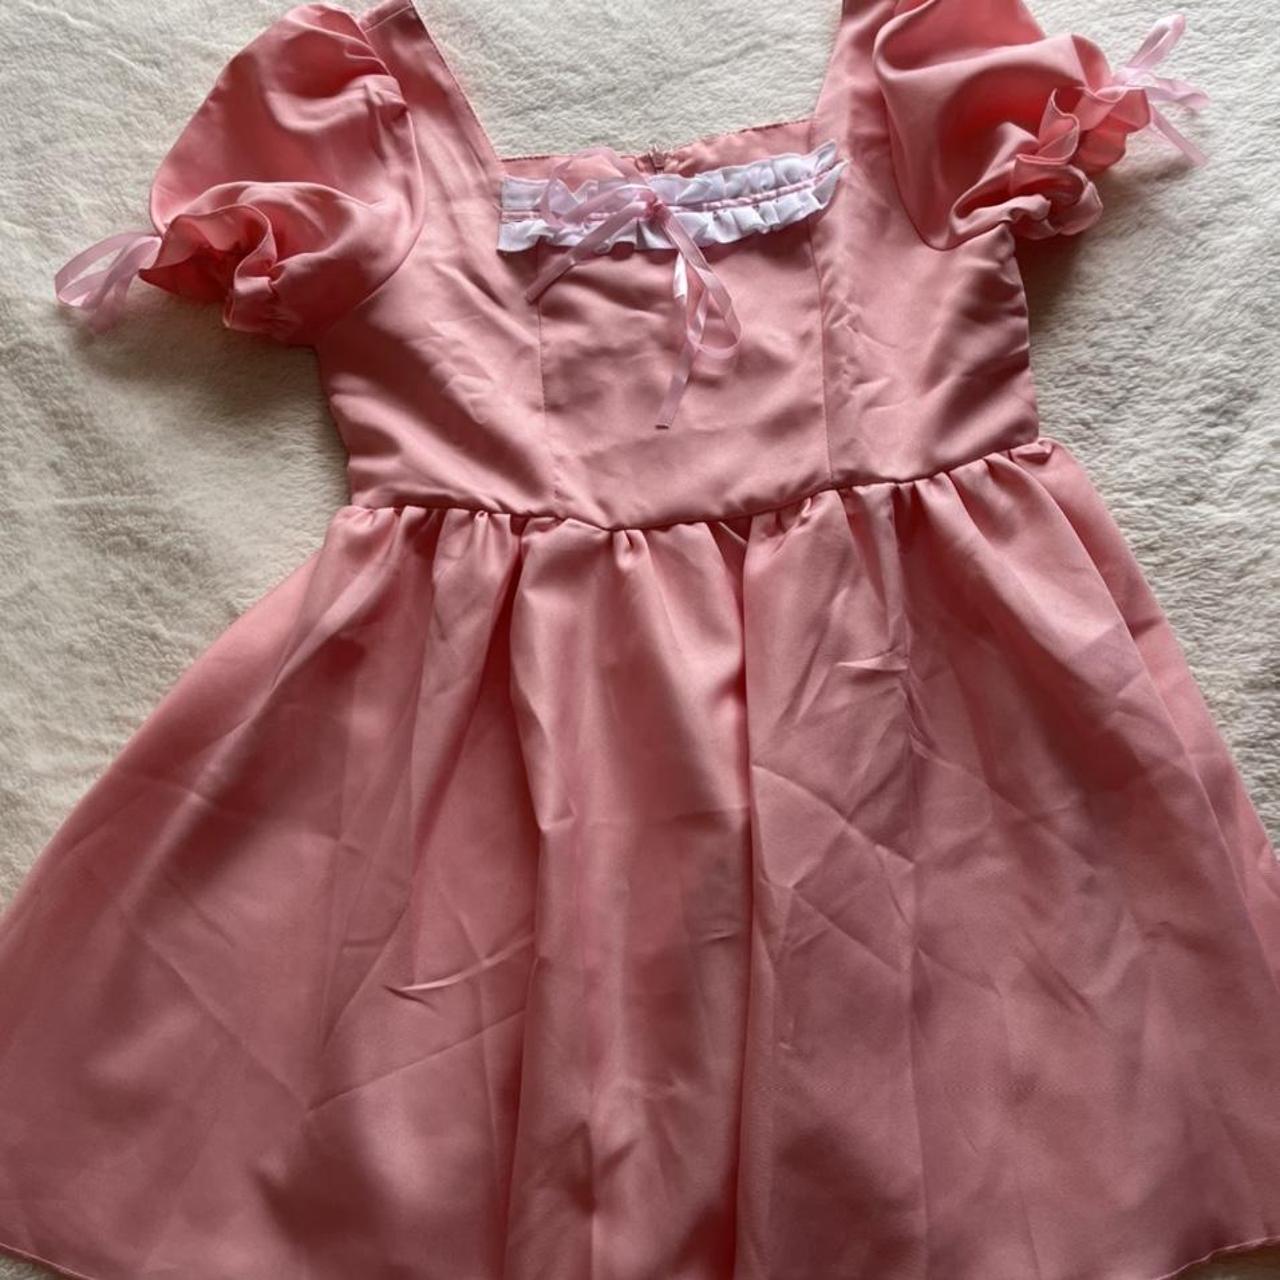 cute pink maid dress with accessories ♡´･ᴗ･`♡ i... - Depop